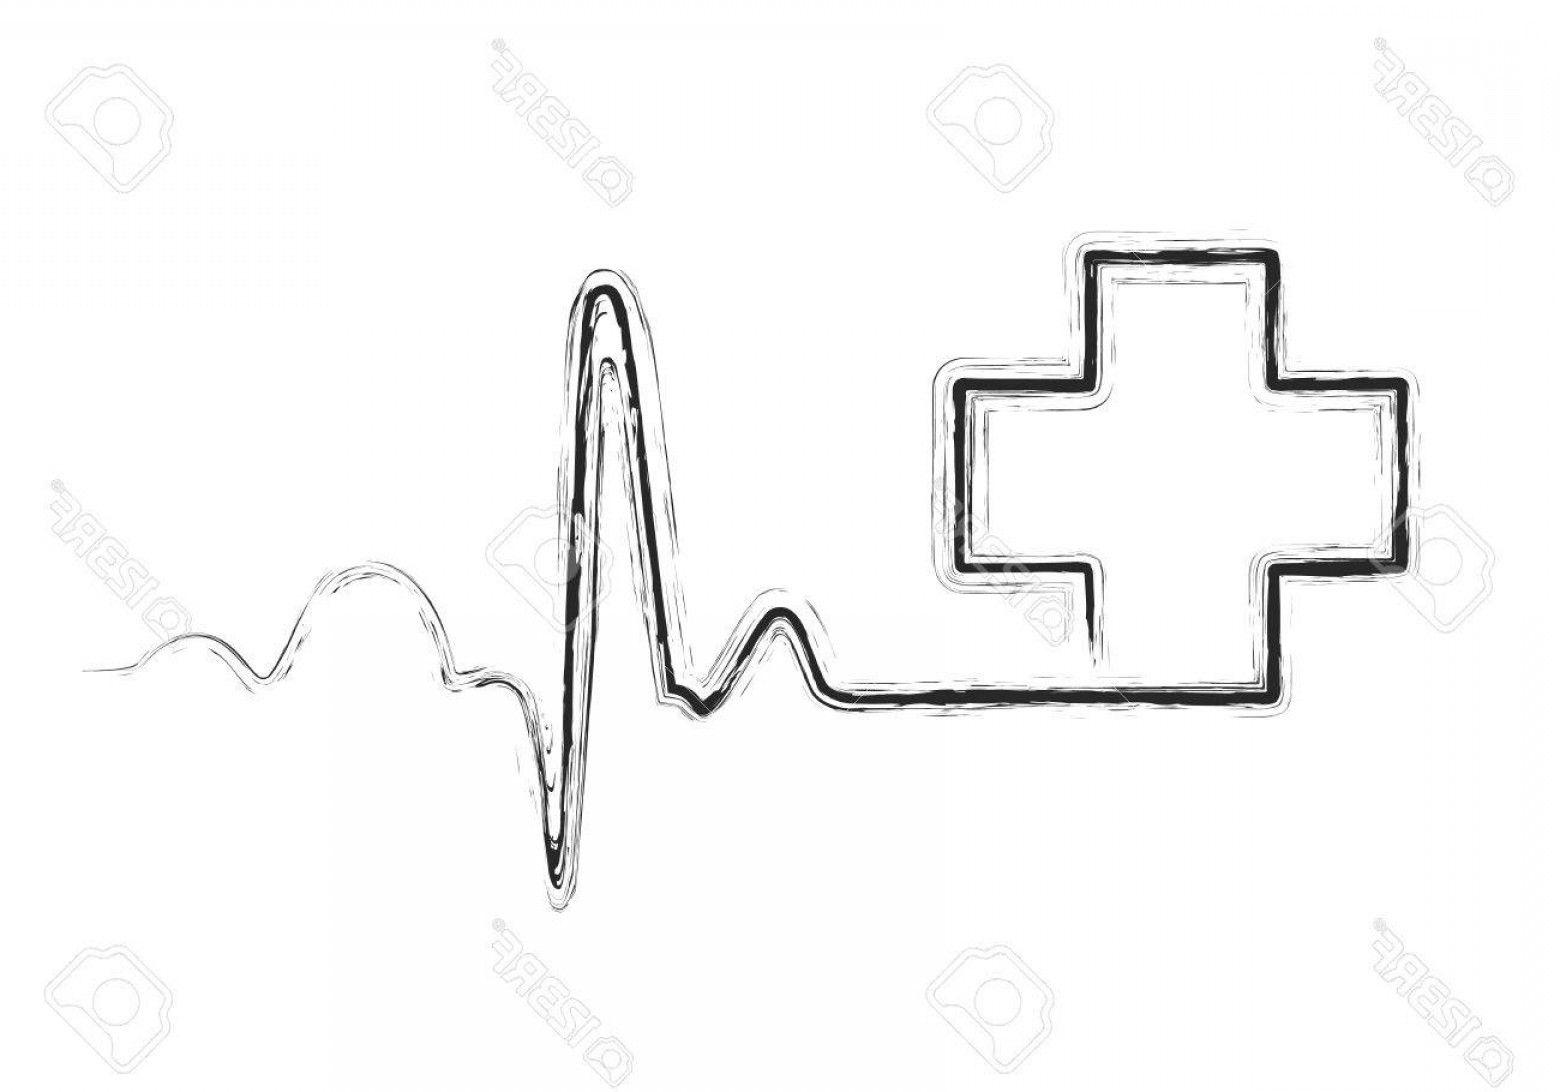 Black and White Medical Cross Logo - Photostock Vector Gray Heartbeat Sign With Medical Cross Vector